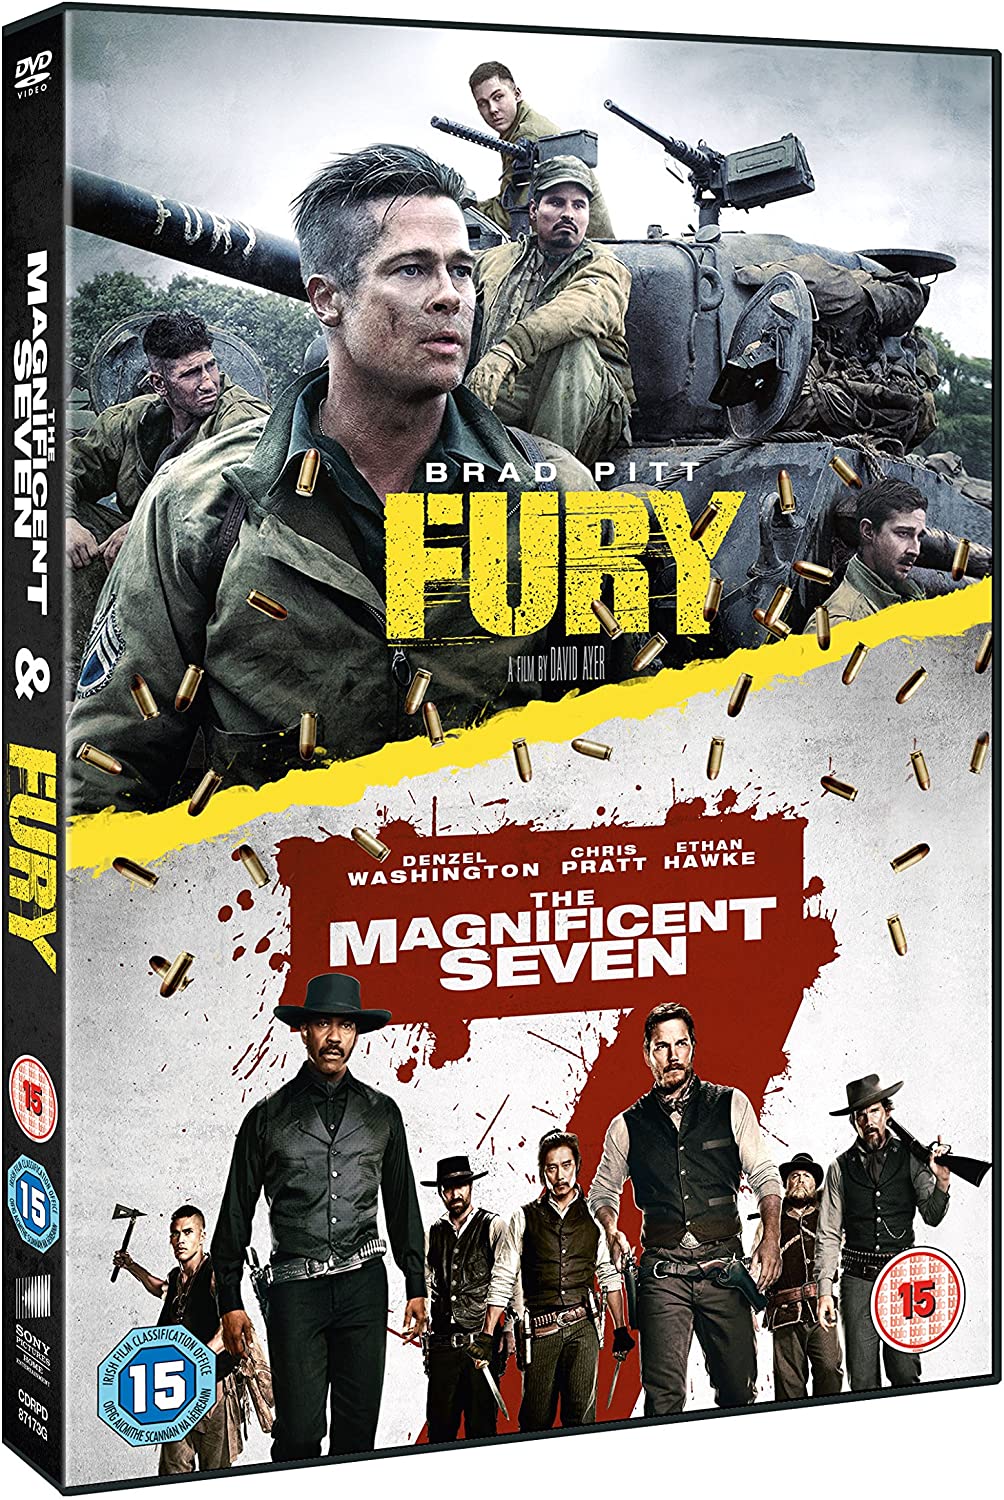 Fury/The Magnificent Seven - War/Action [DVD]